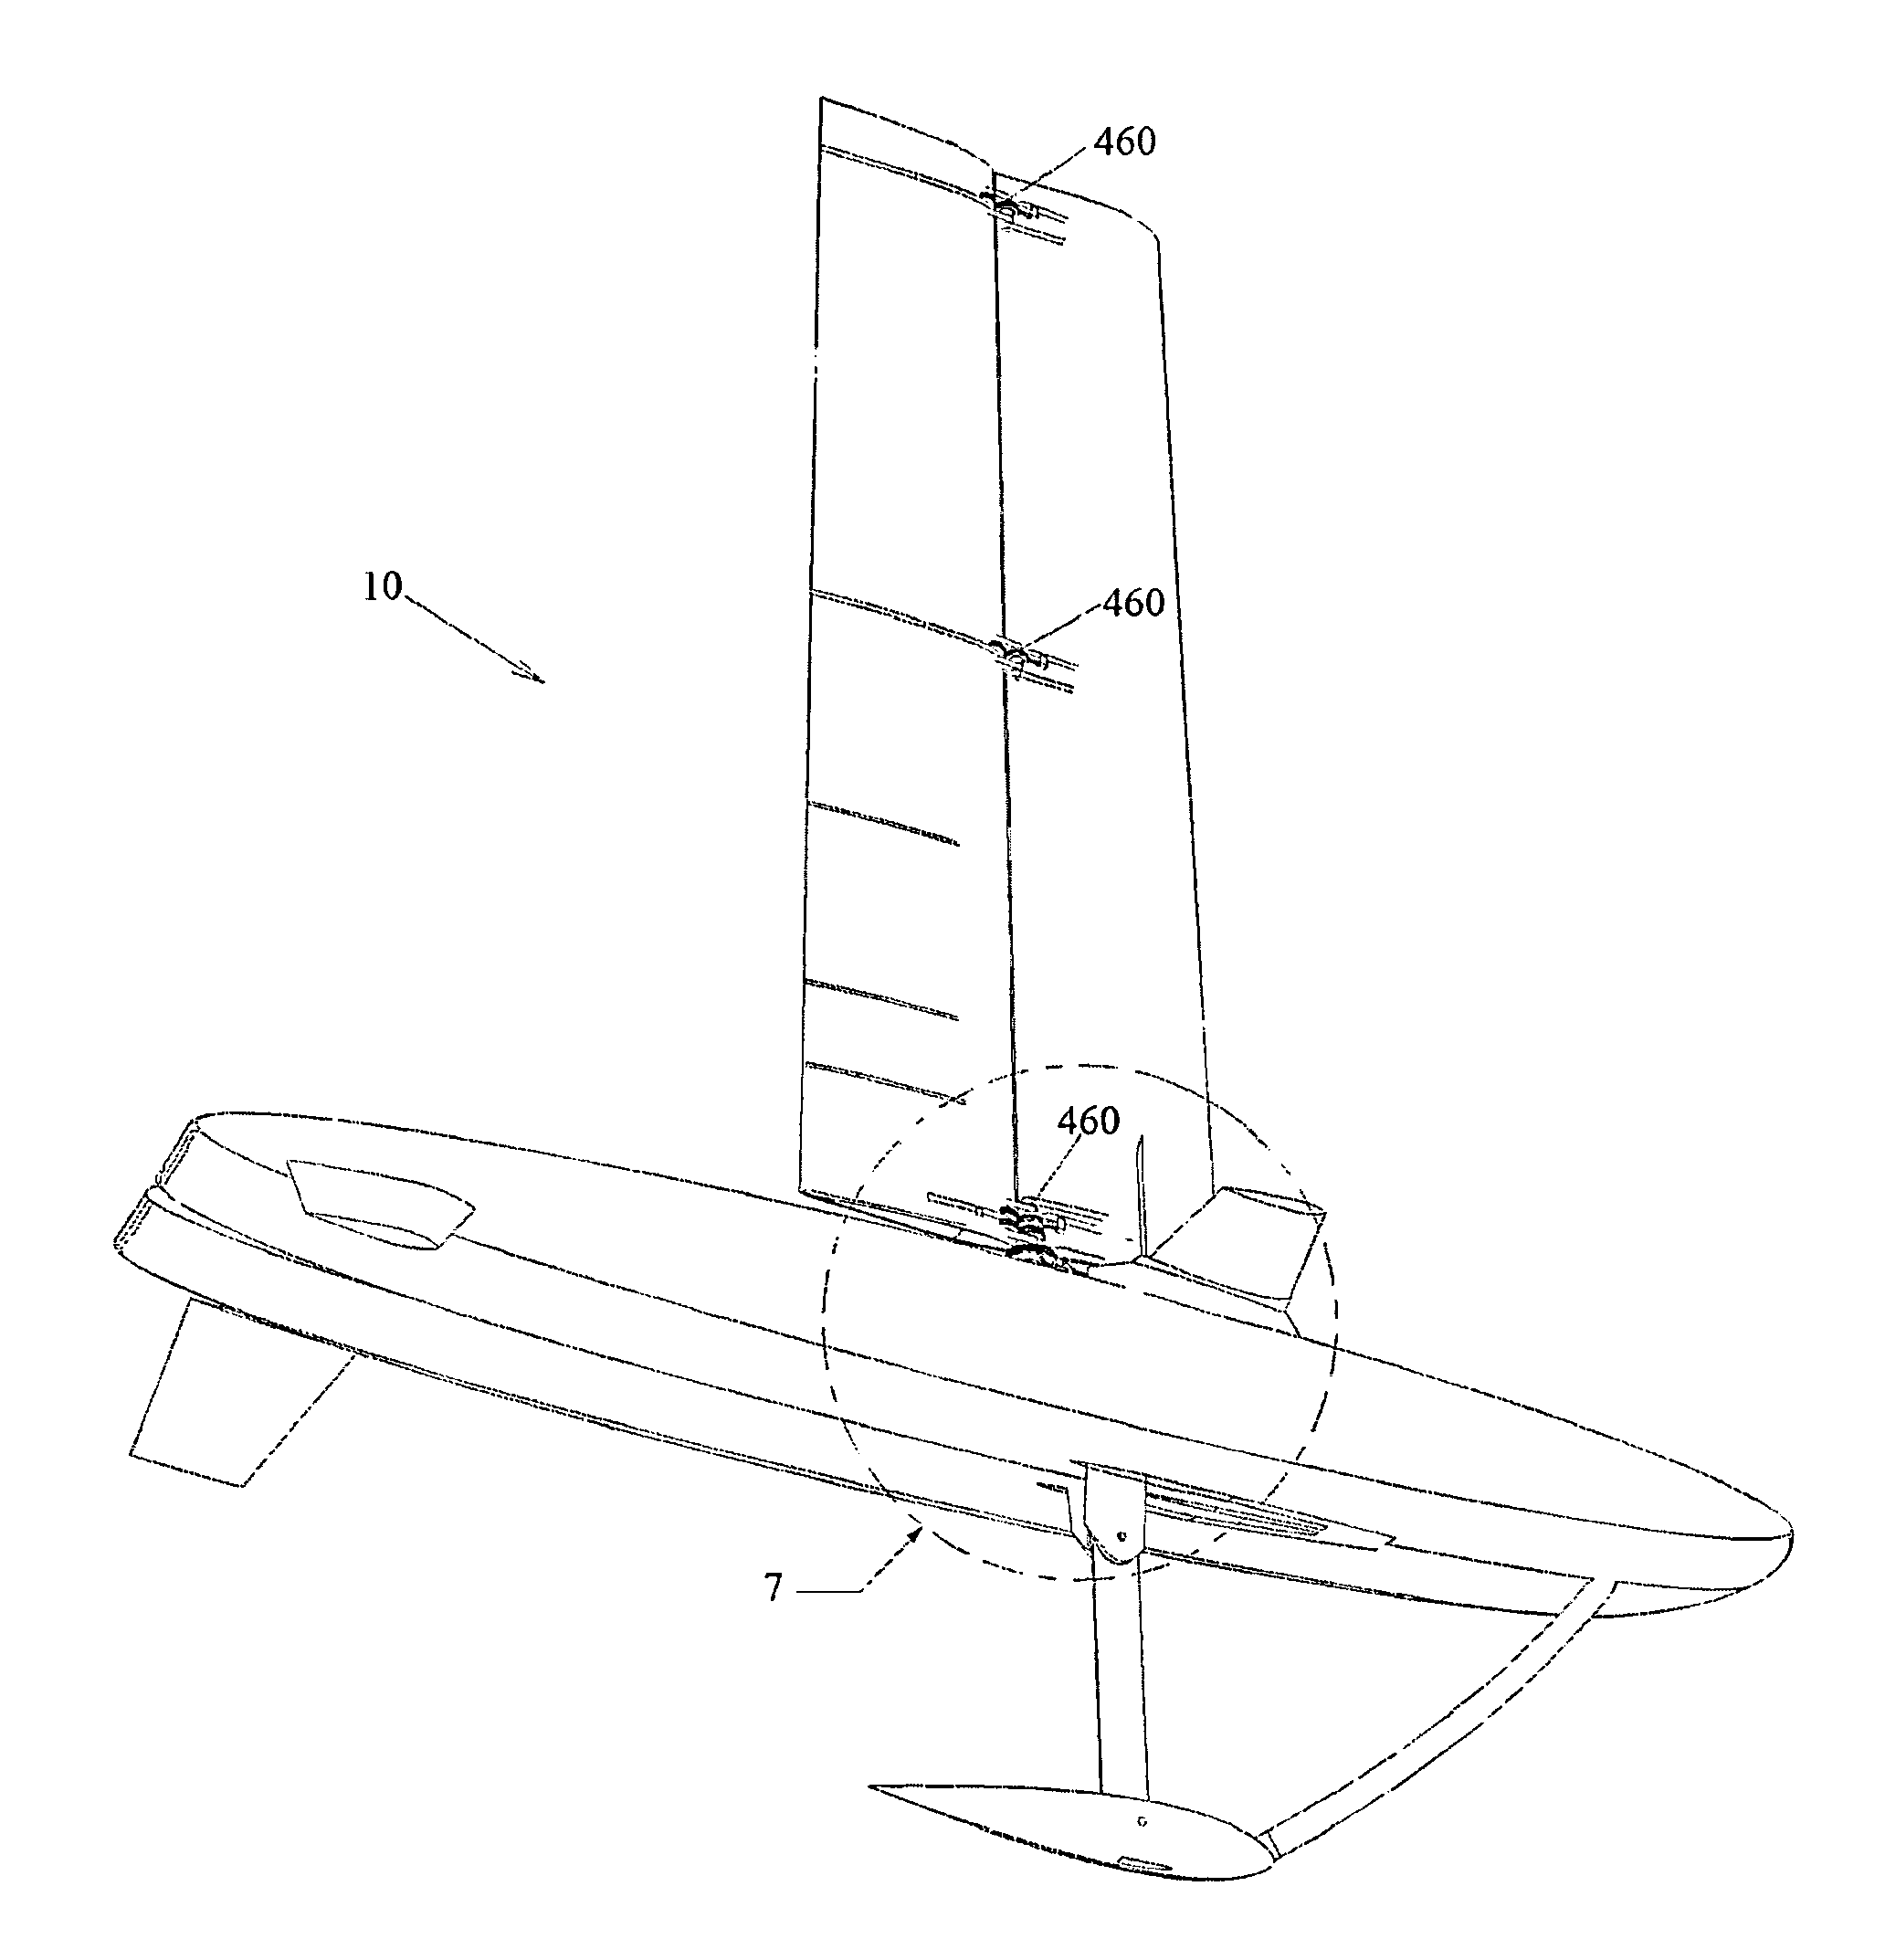 Submersible vessel having retractable wing and keel assemblies